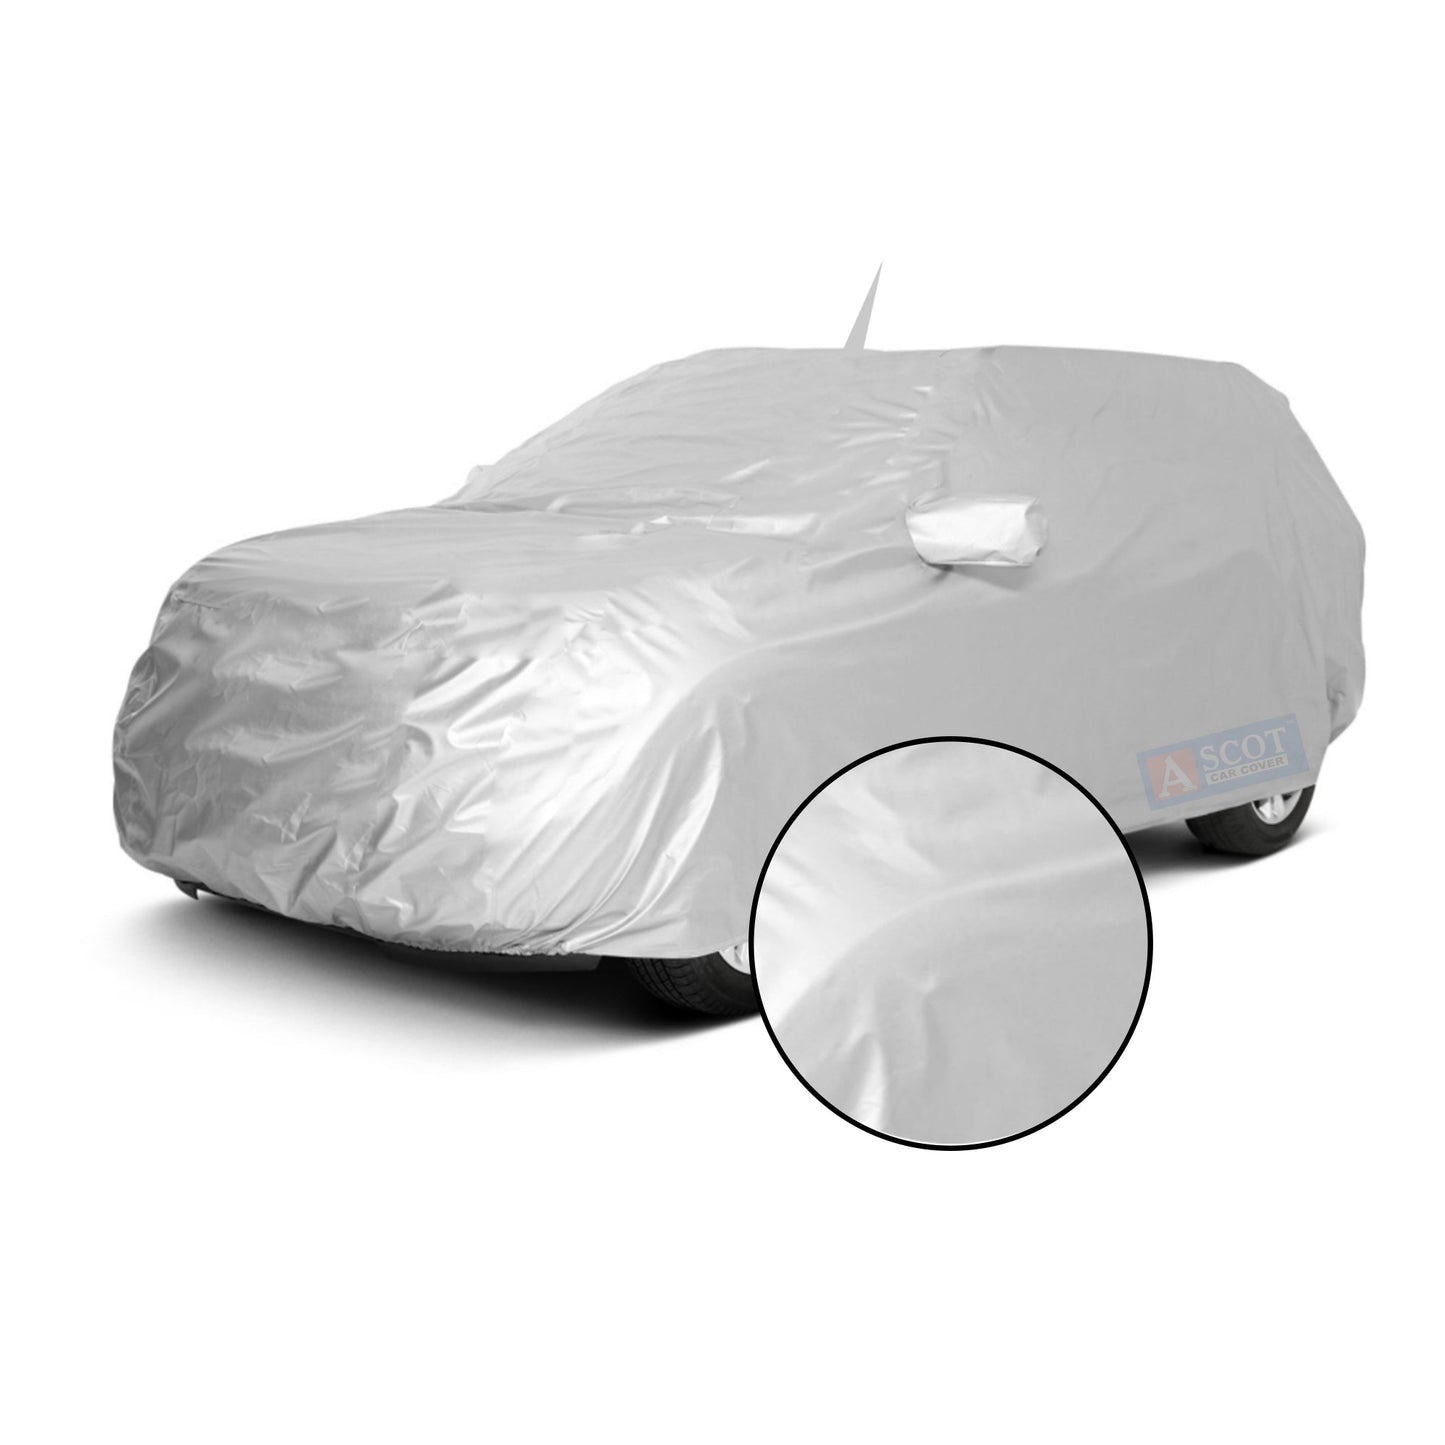 Ascot Hyundai Santro Xing 2003-2018 Model Car Body Cover Dust Proof, Trippel Stitched